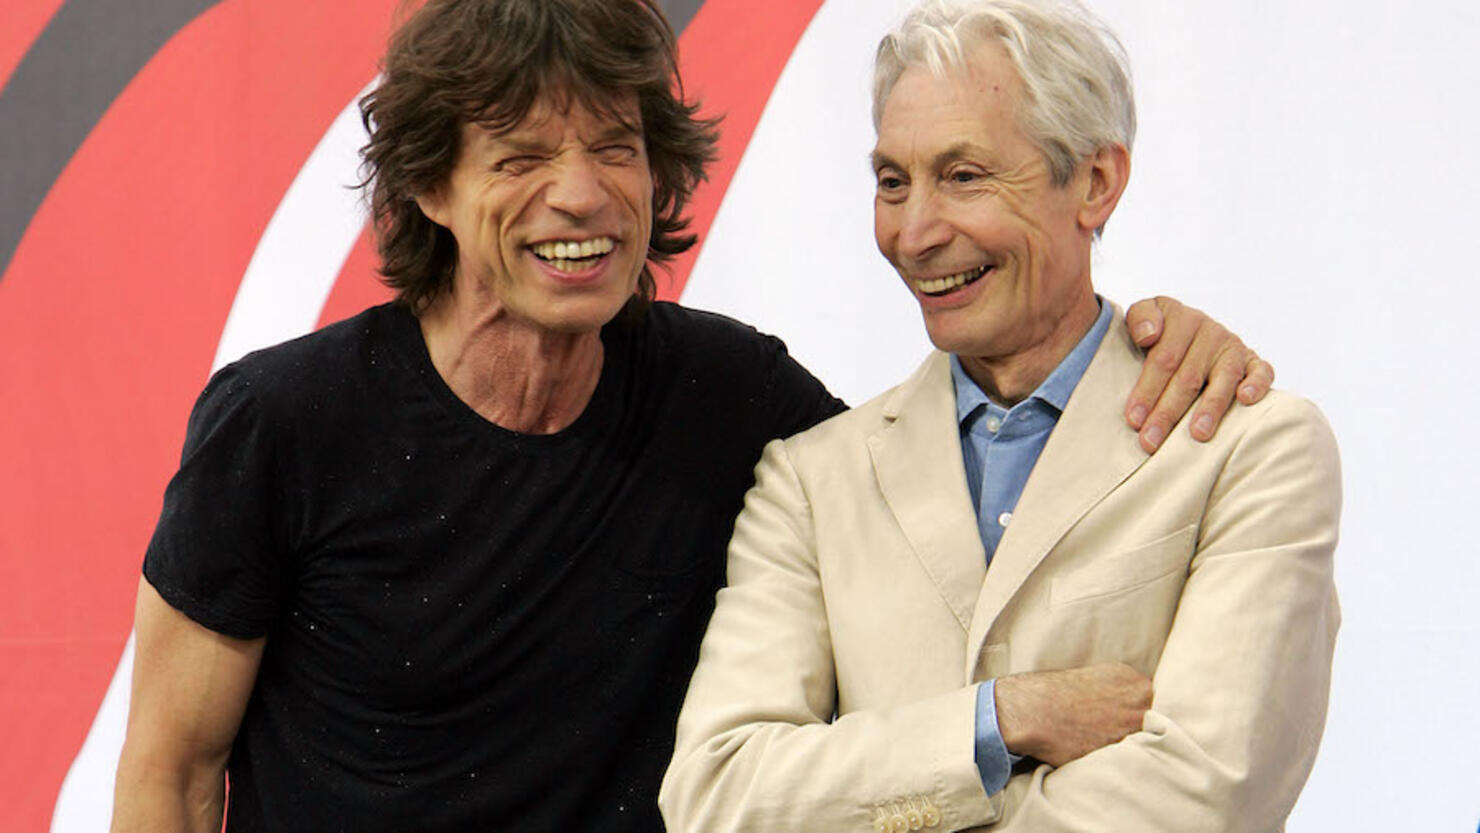 The Rolling Stones Announce Tour With A Live Performance